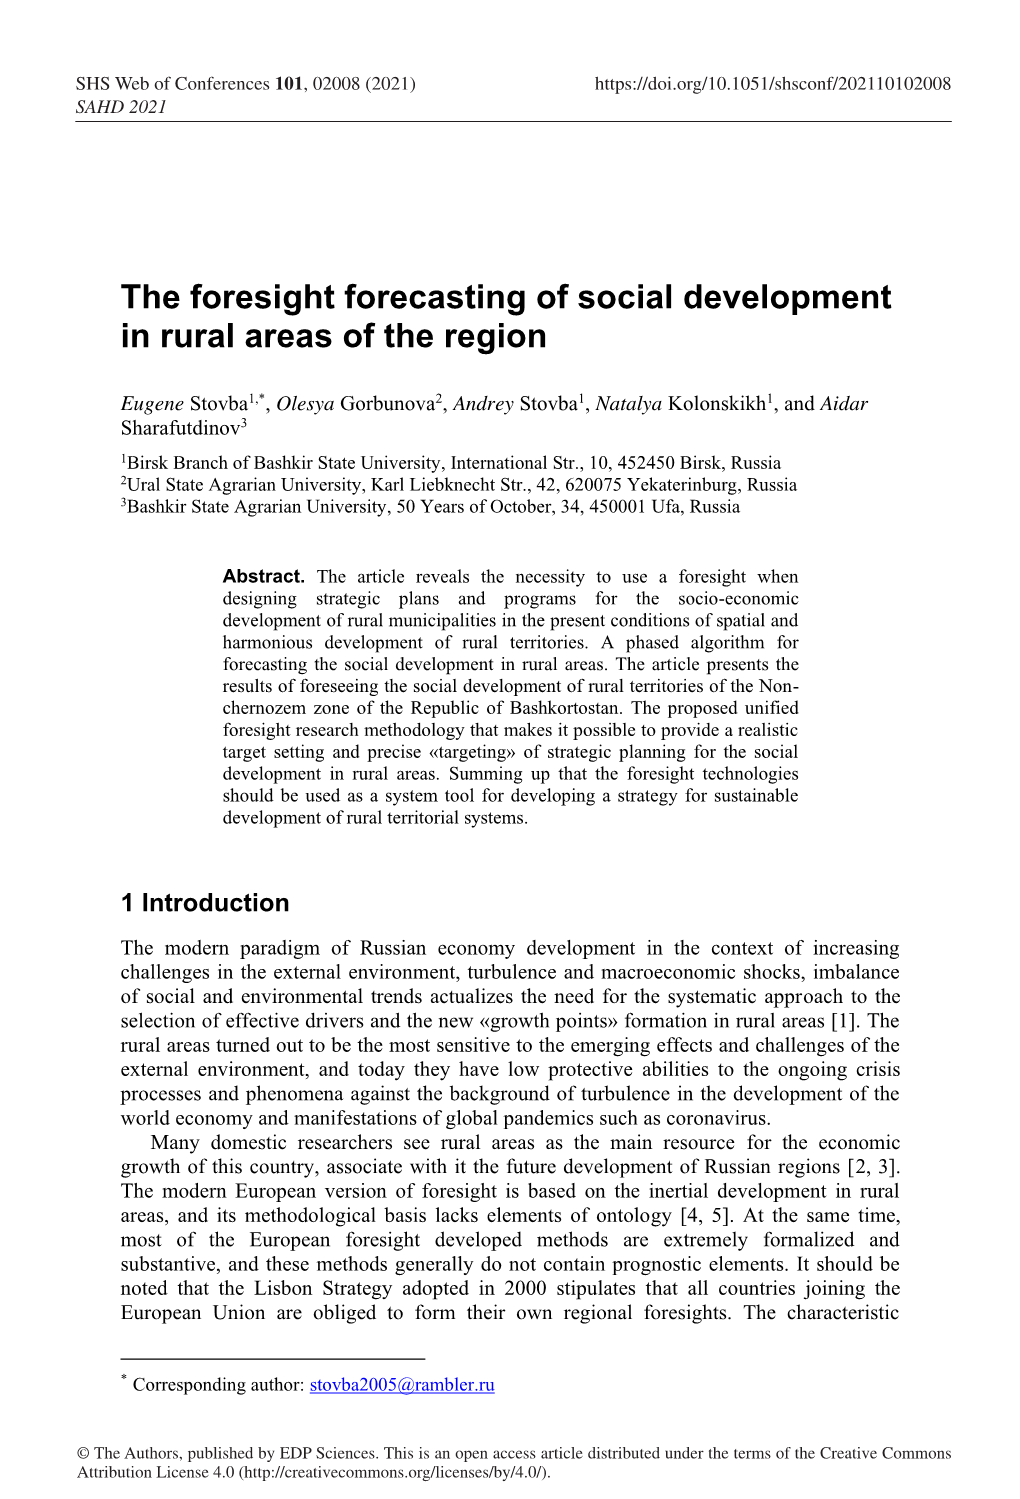 The Foresight Forecasting of Social Development in Rural Areas of the Region